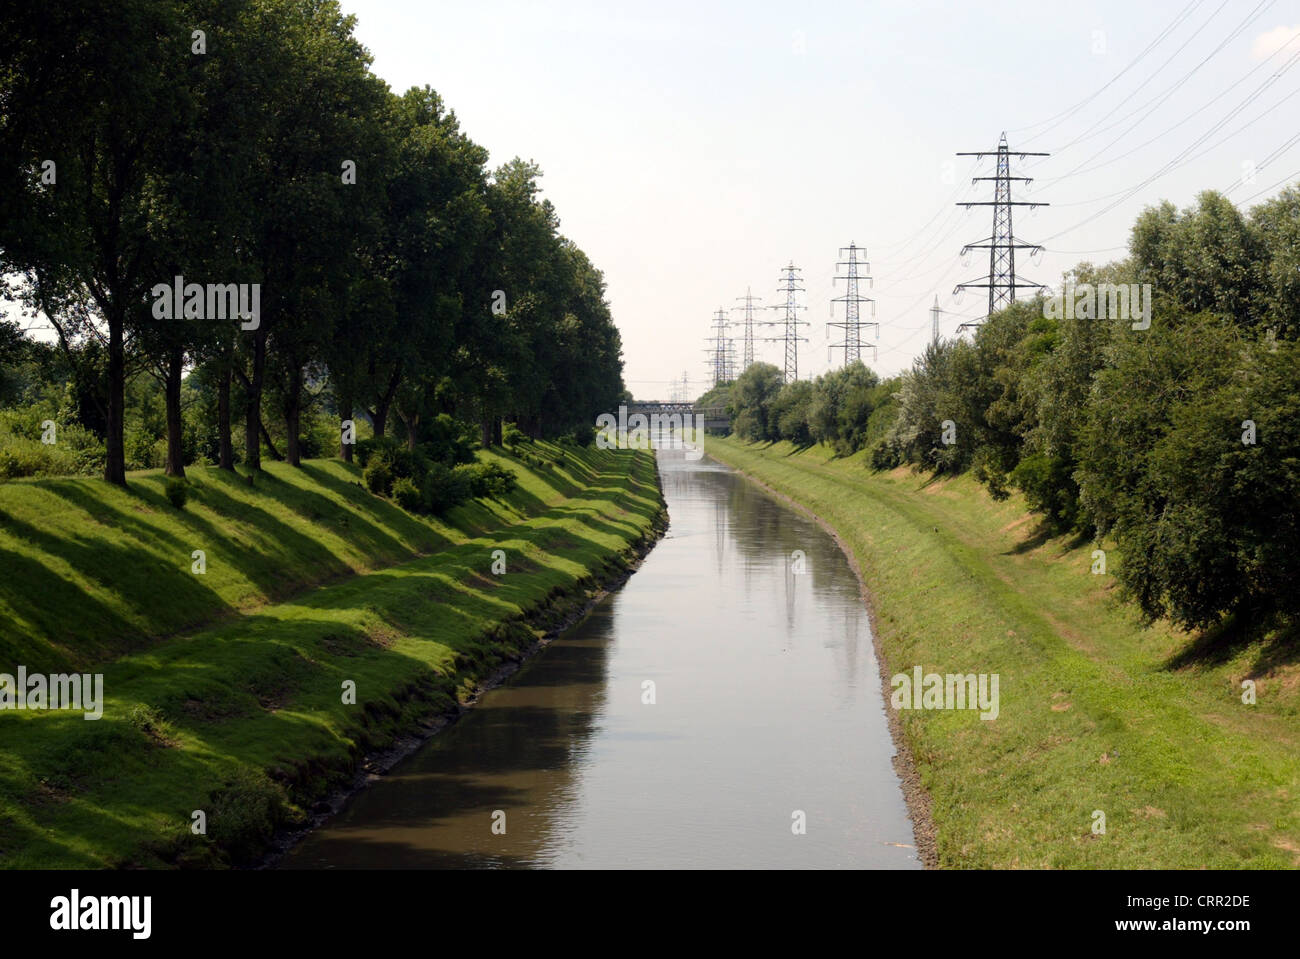 The Emscher sewage system in the Ruhr Stock Photo